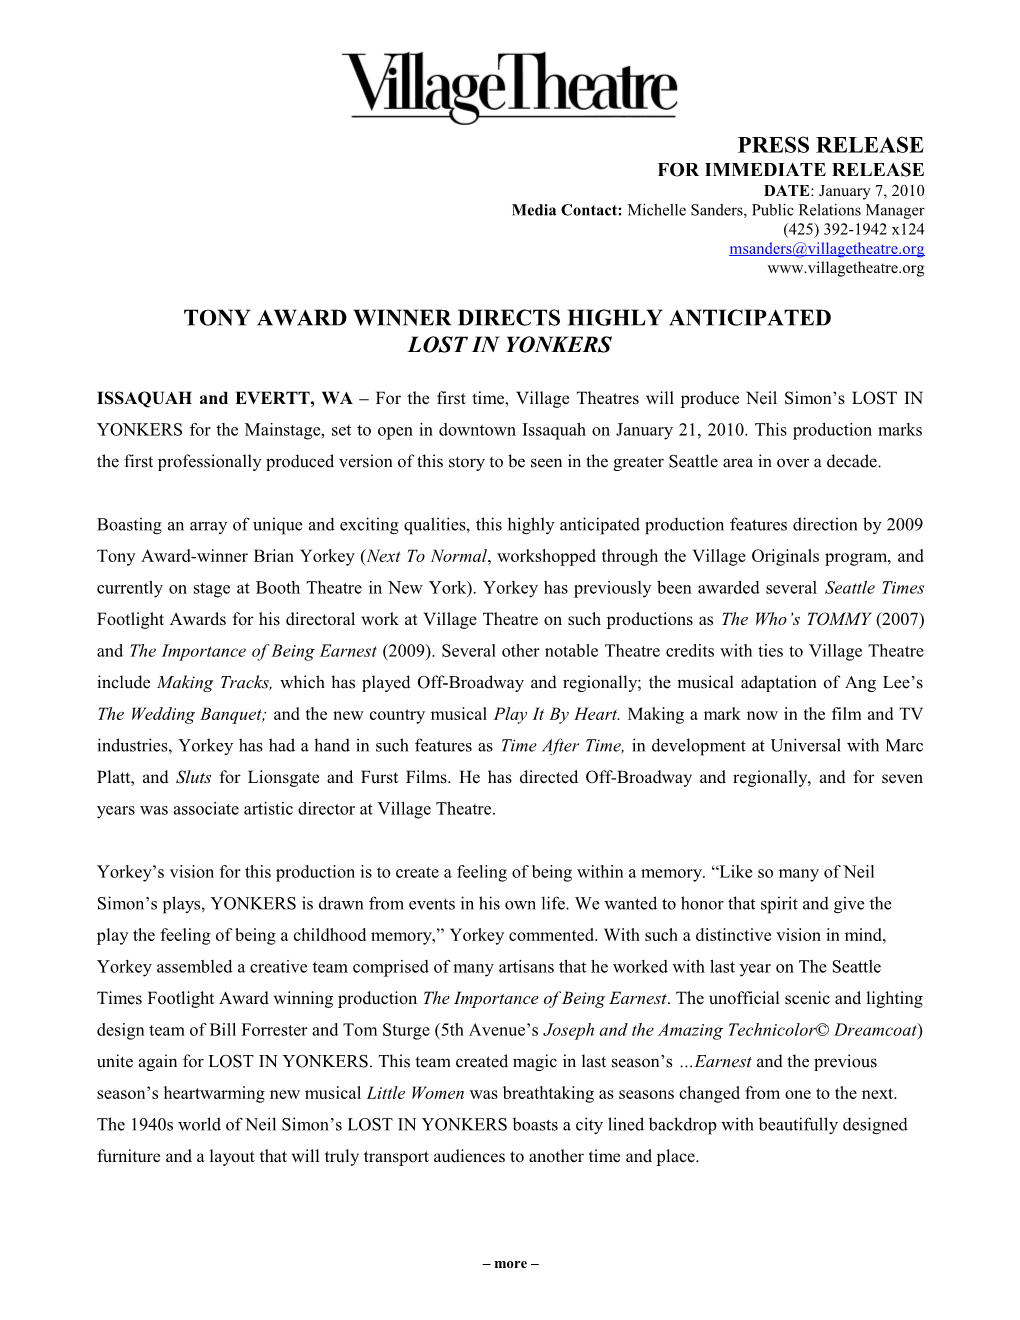 FOR IMMEDIATE RELEASE: March 22, 2002 s4